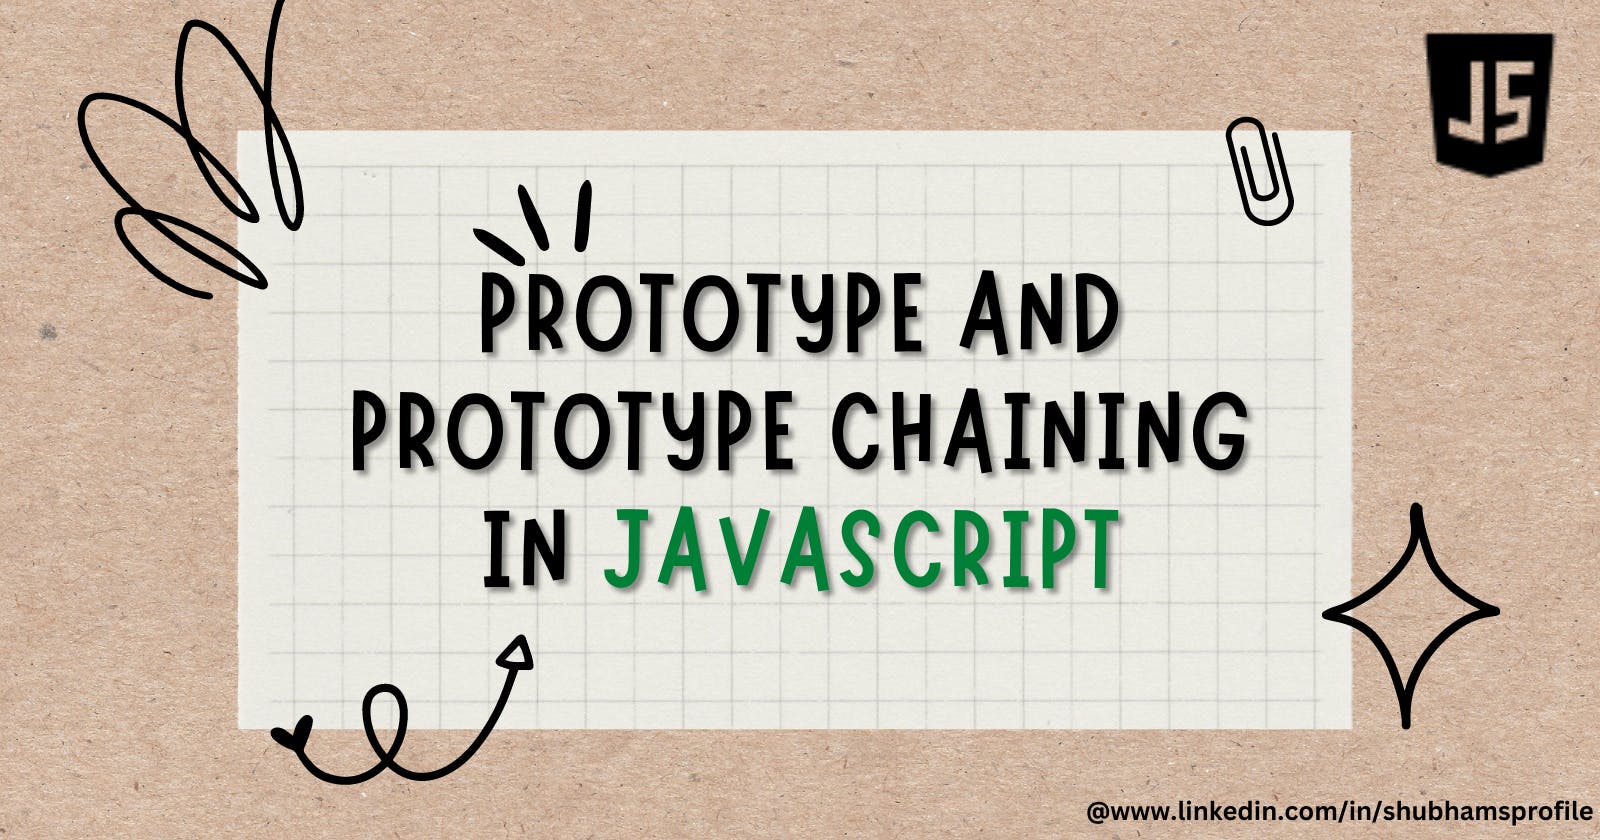 What is prototype and prototype chaining in JavaScript ?